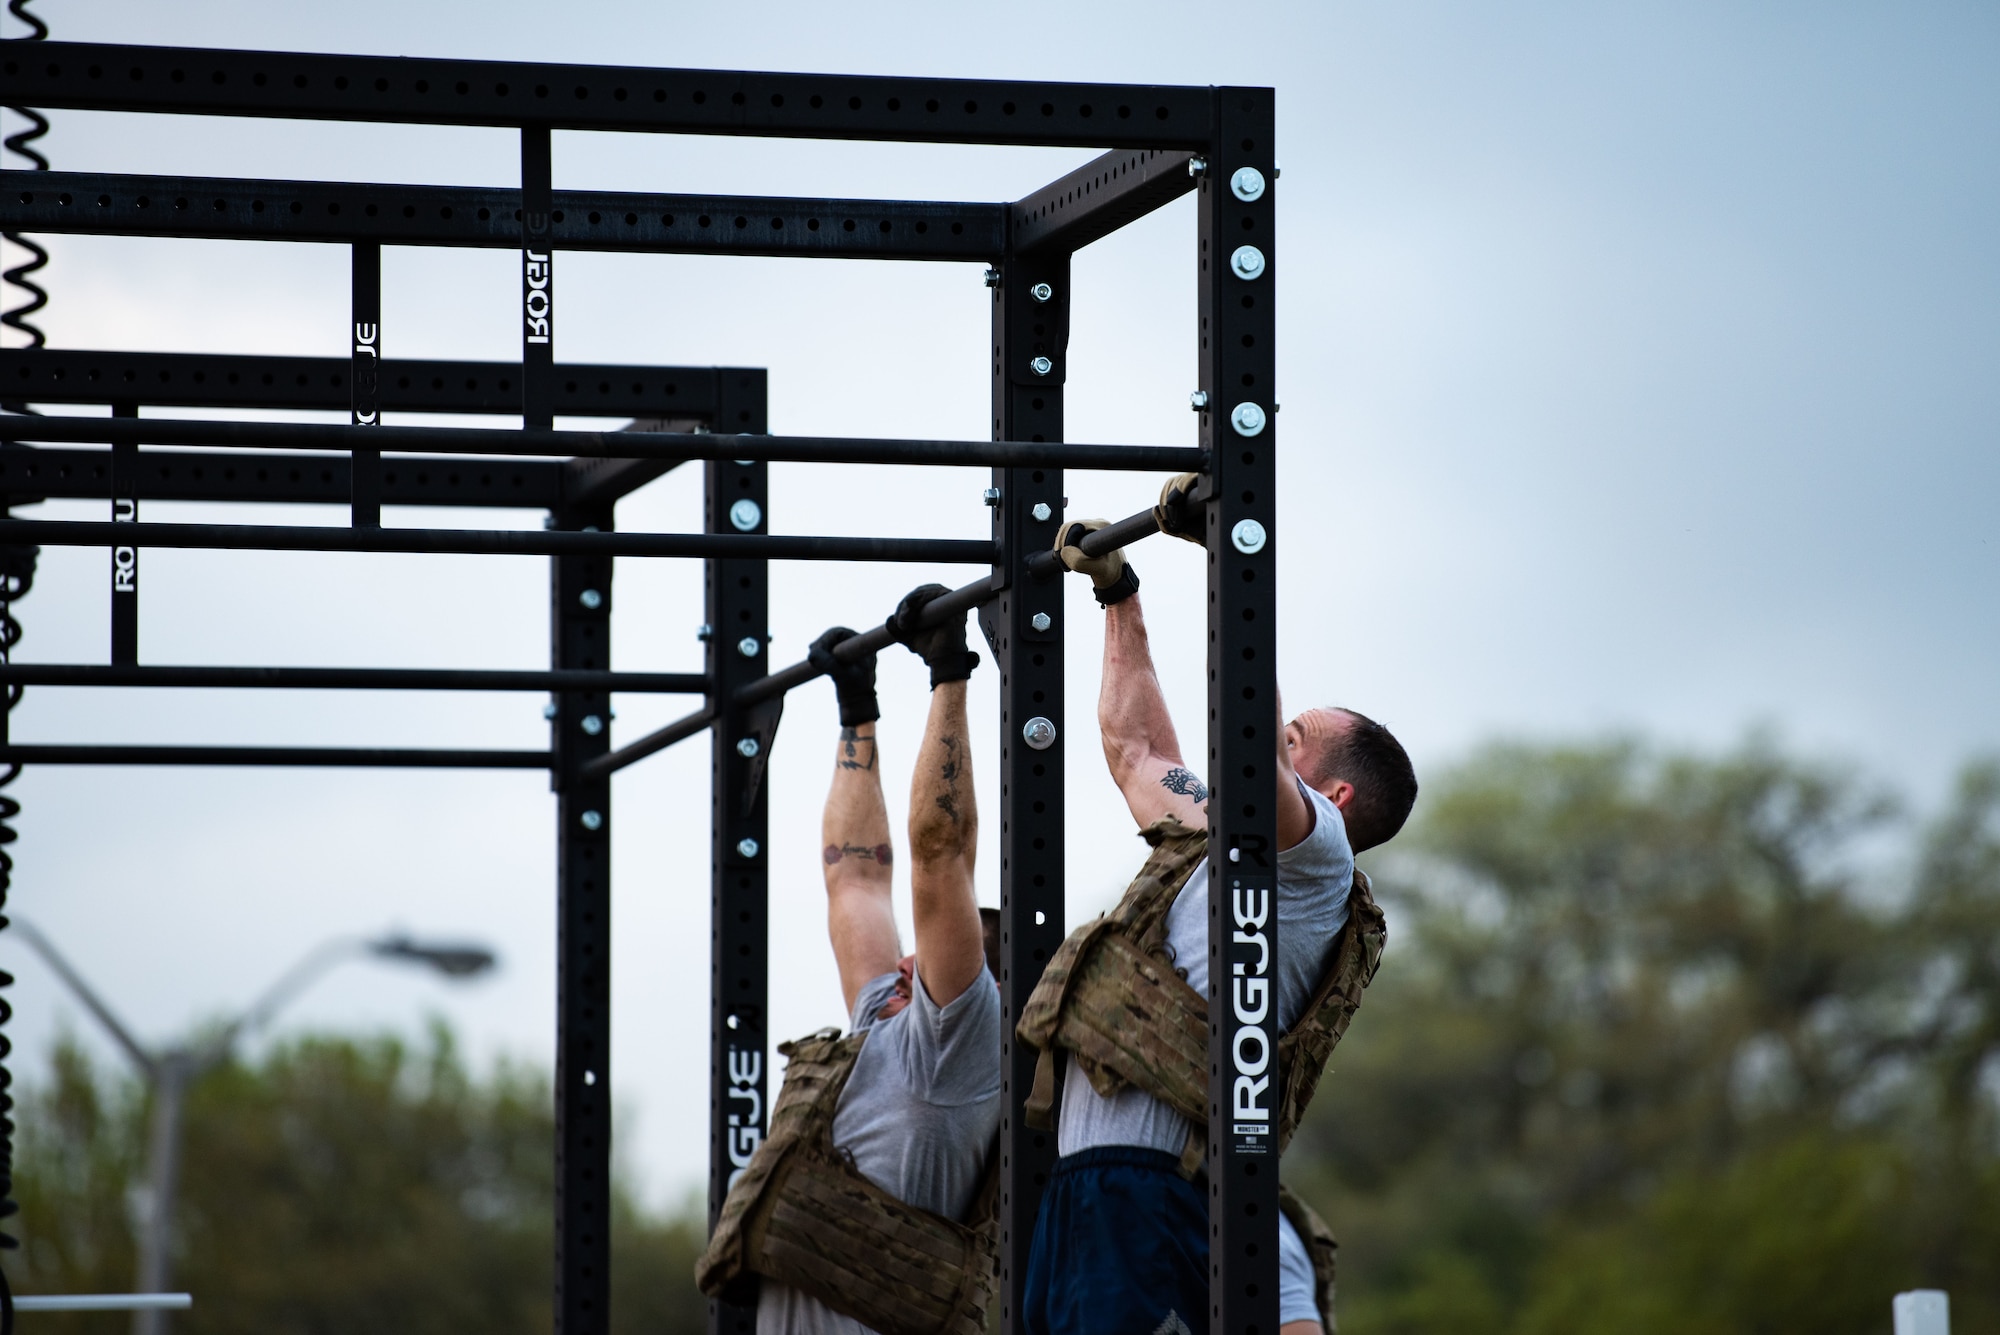 Airmen complete pullups on an outdoor bar as the sun rises